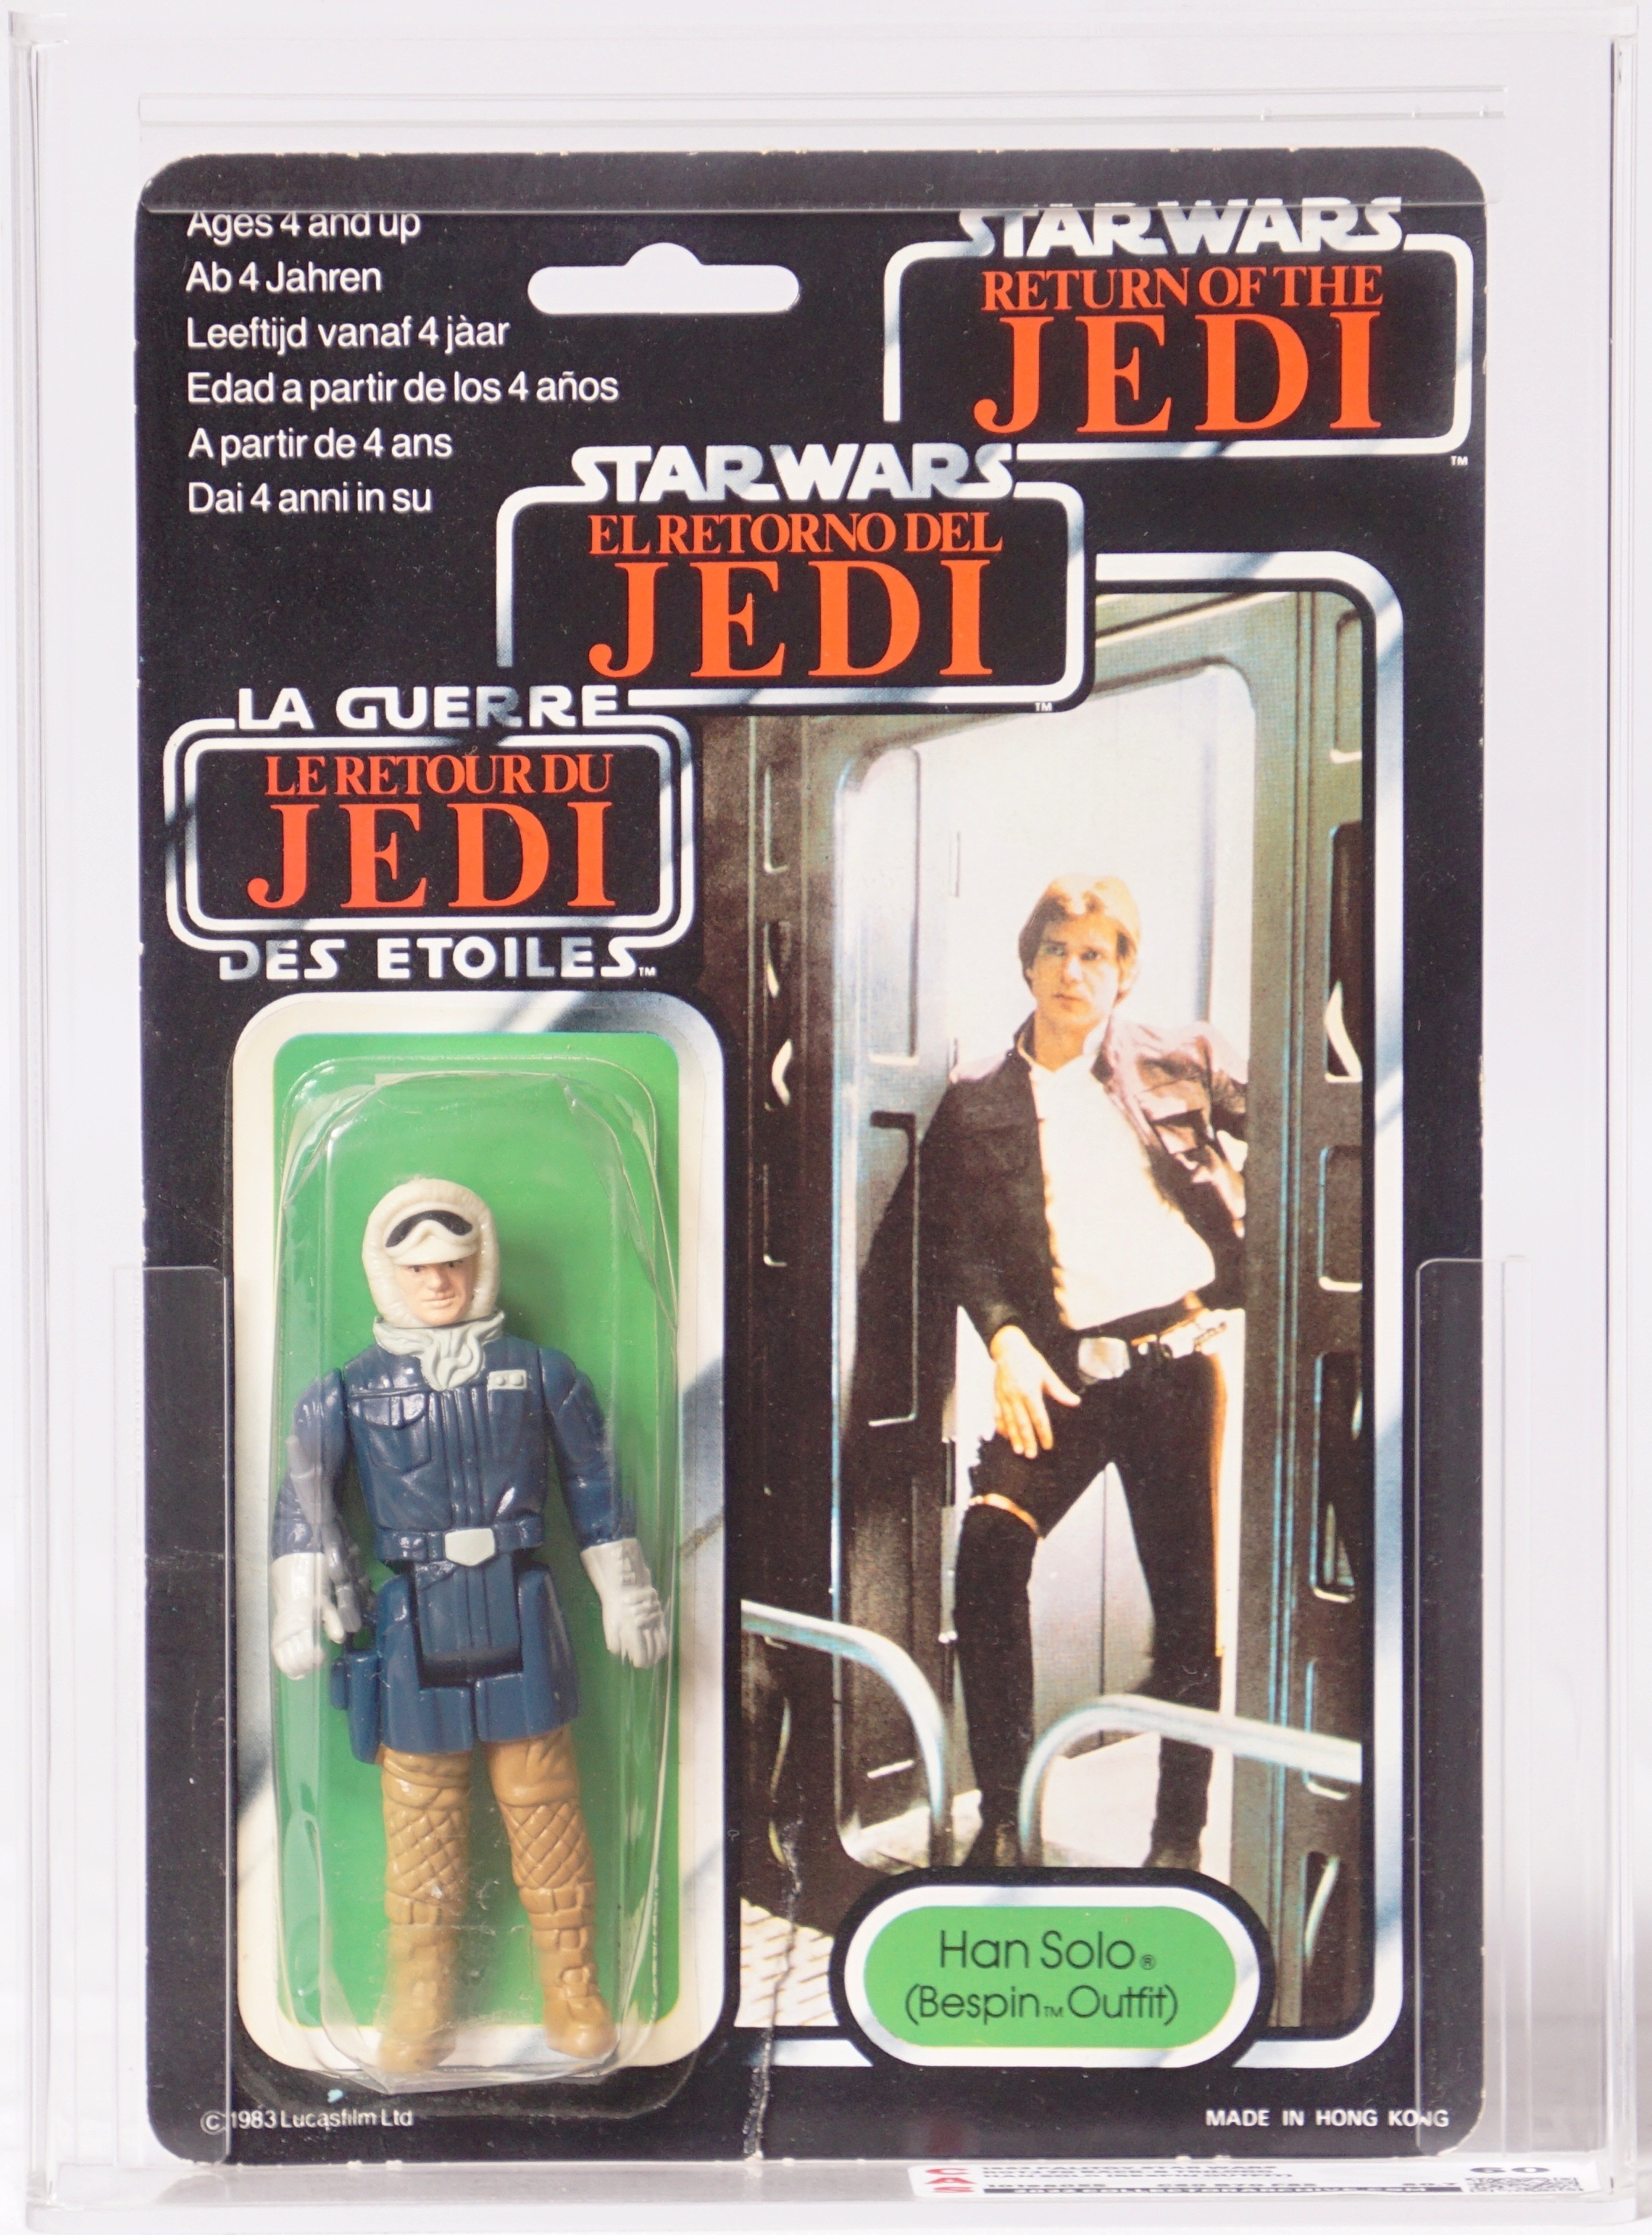 Star Wars Palitoy/Trilogo Carded Action Figure - Han Solo (Bespin Outfit)